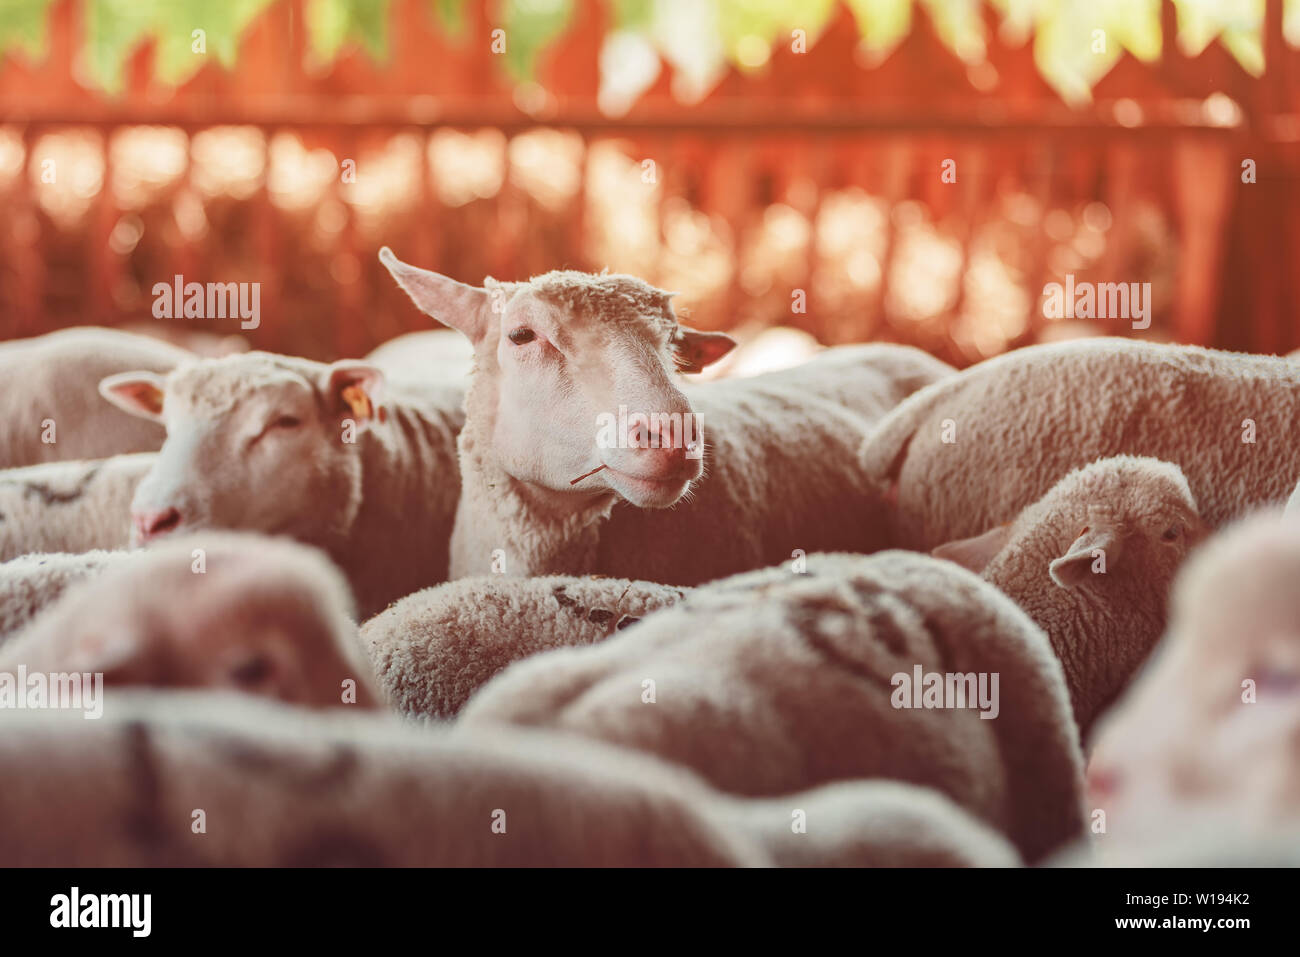 Sheep flock in pen on dairy farm, cute young animals in paddock Stock Photo